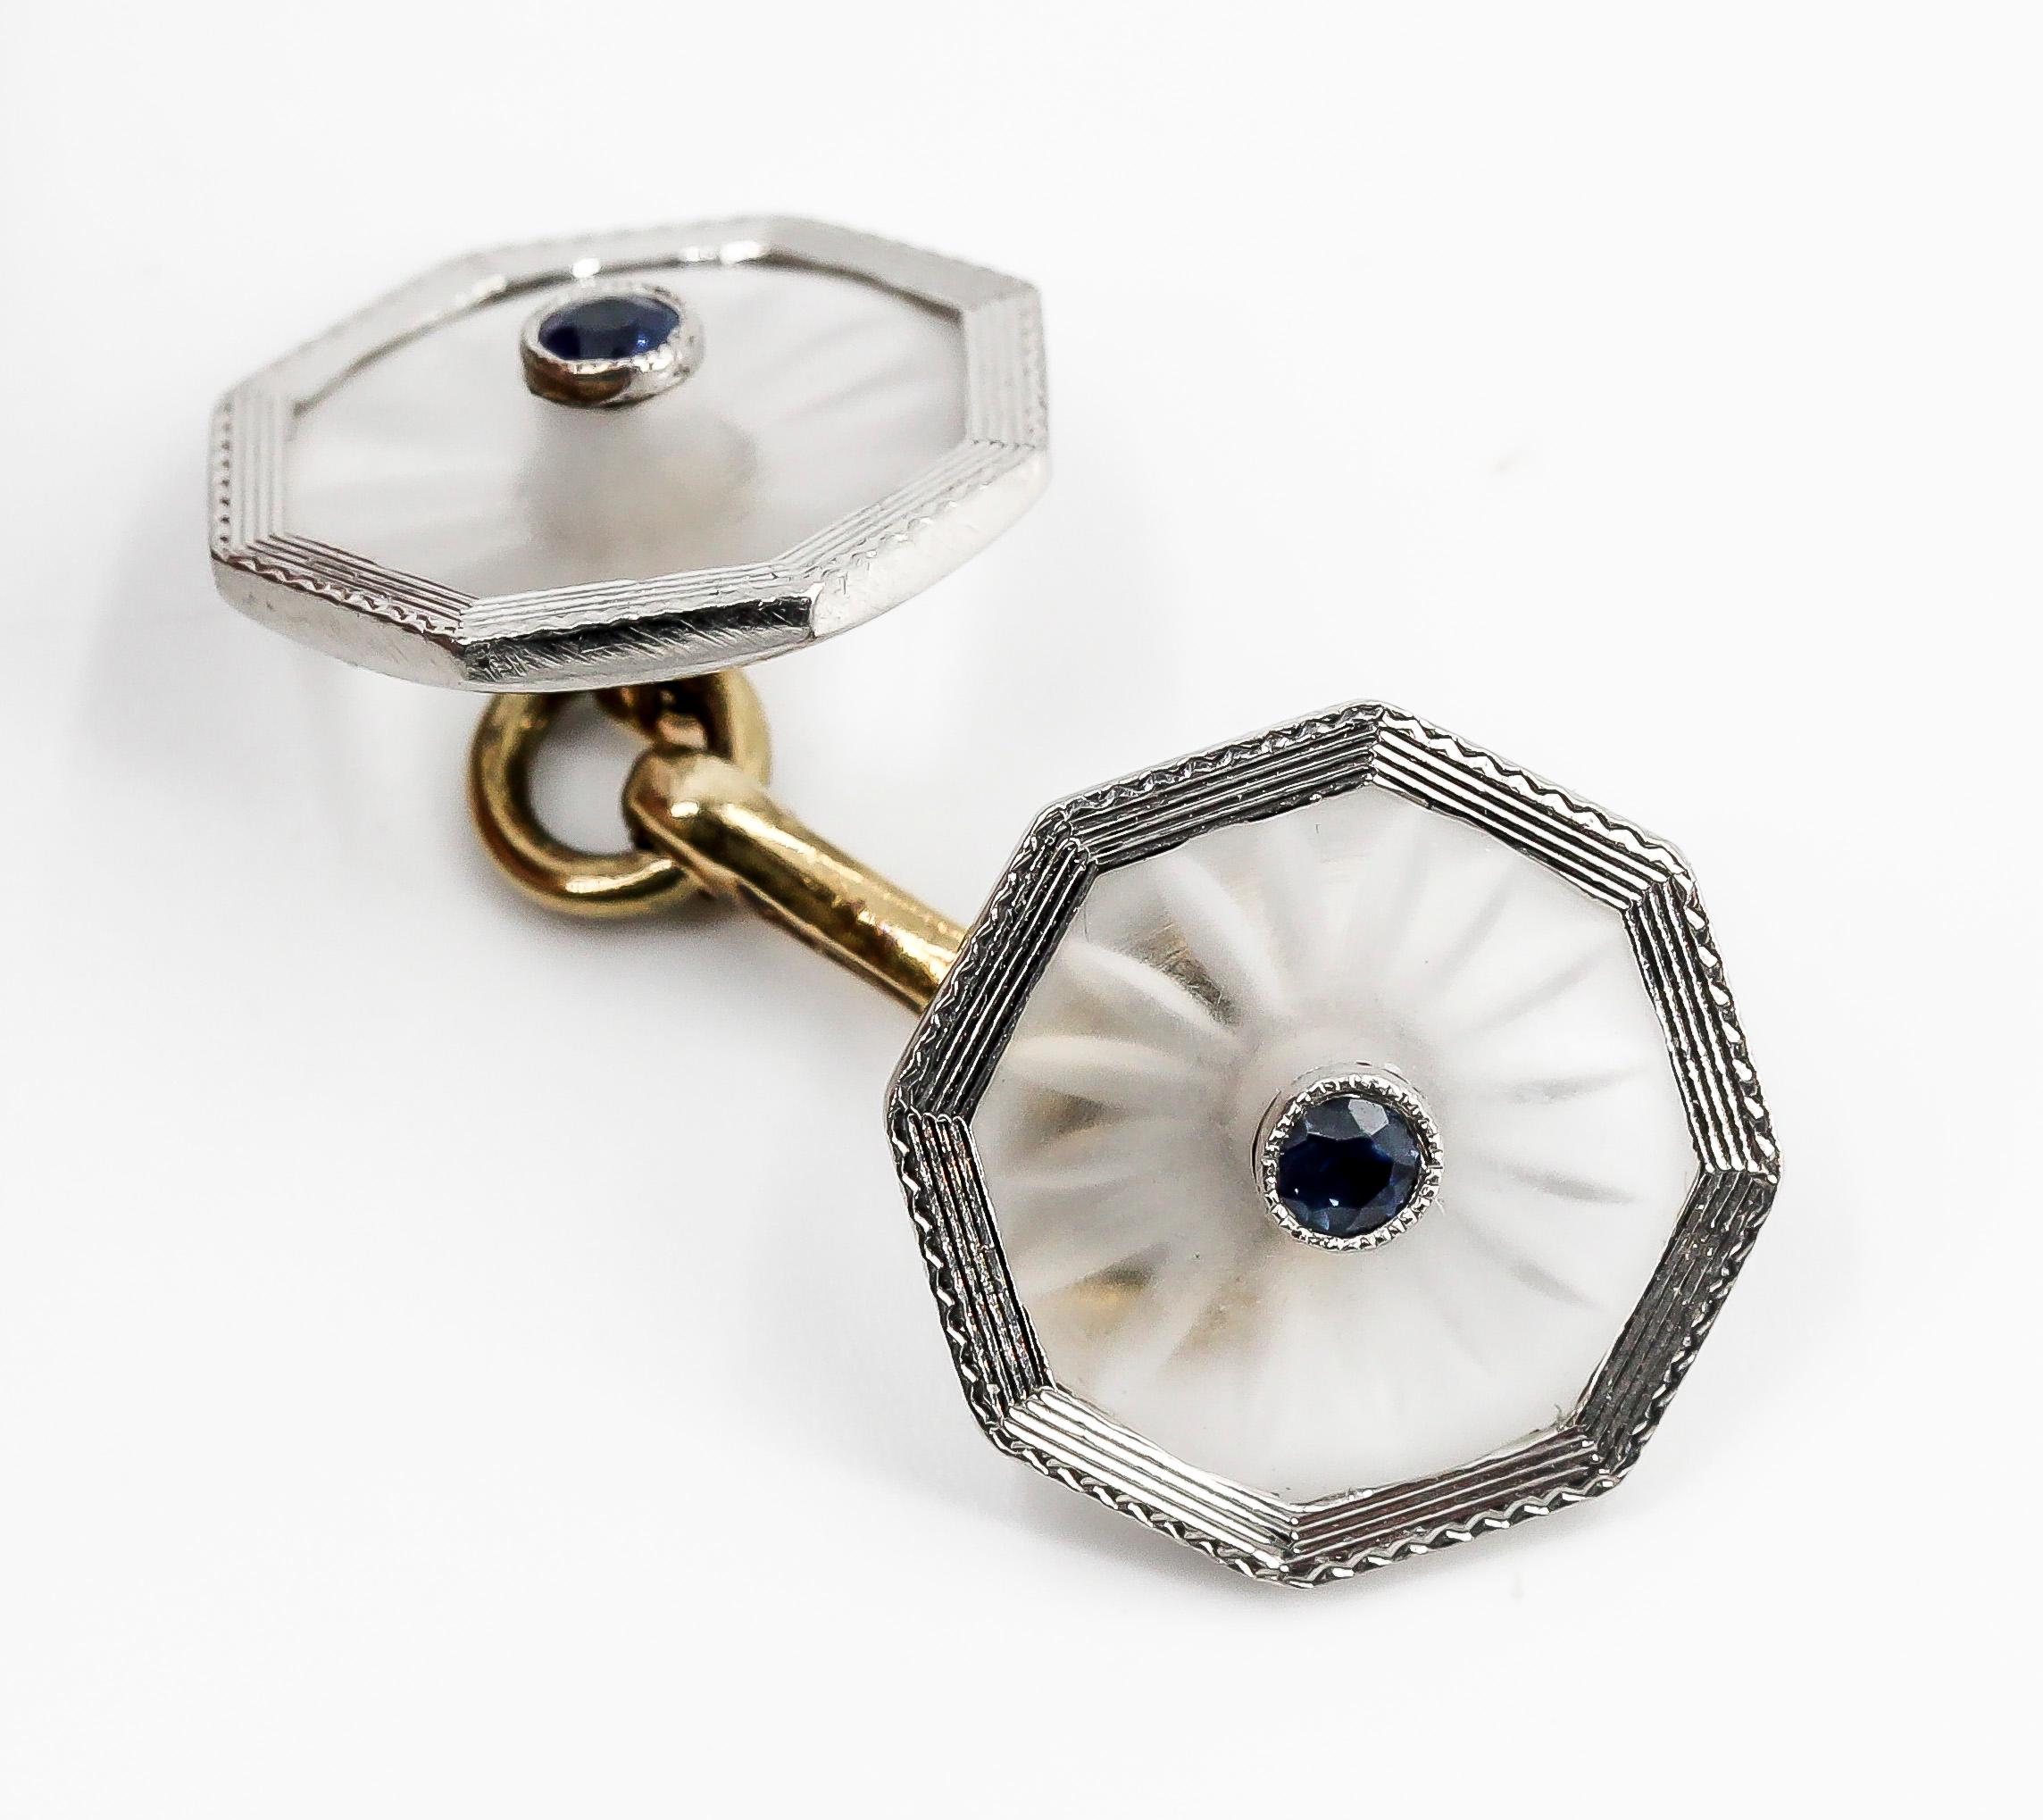 Men's Art Deco Frosted Rock Crystal, Sapphire, Platinum and Gold Cufflinks Stud Set